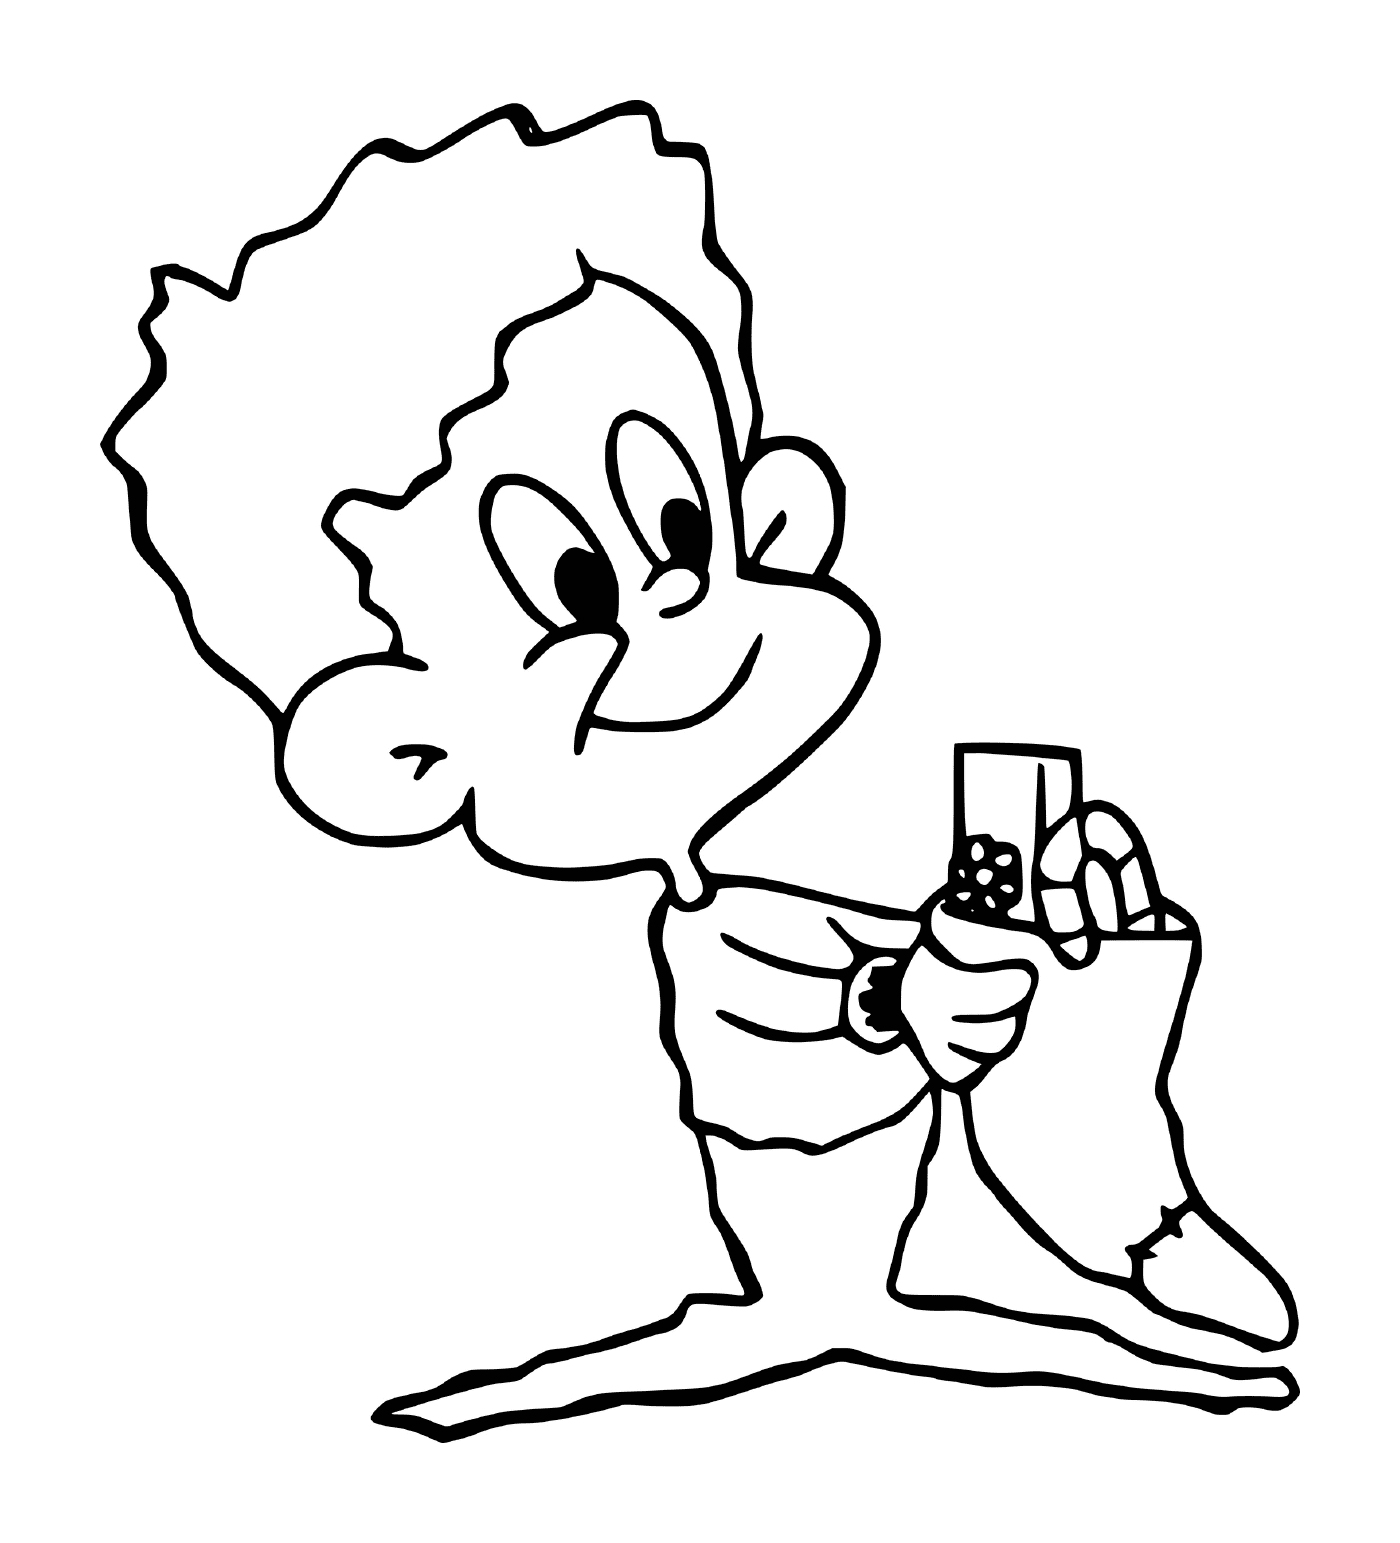  A child with a Christmas stockings 